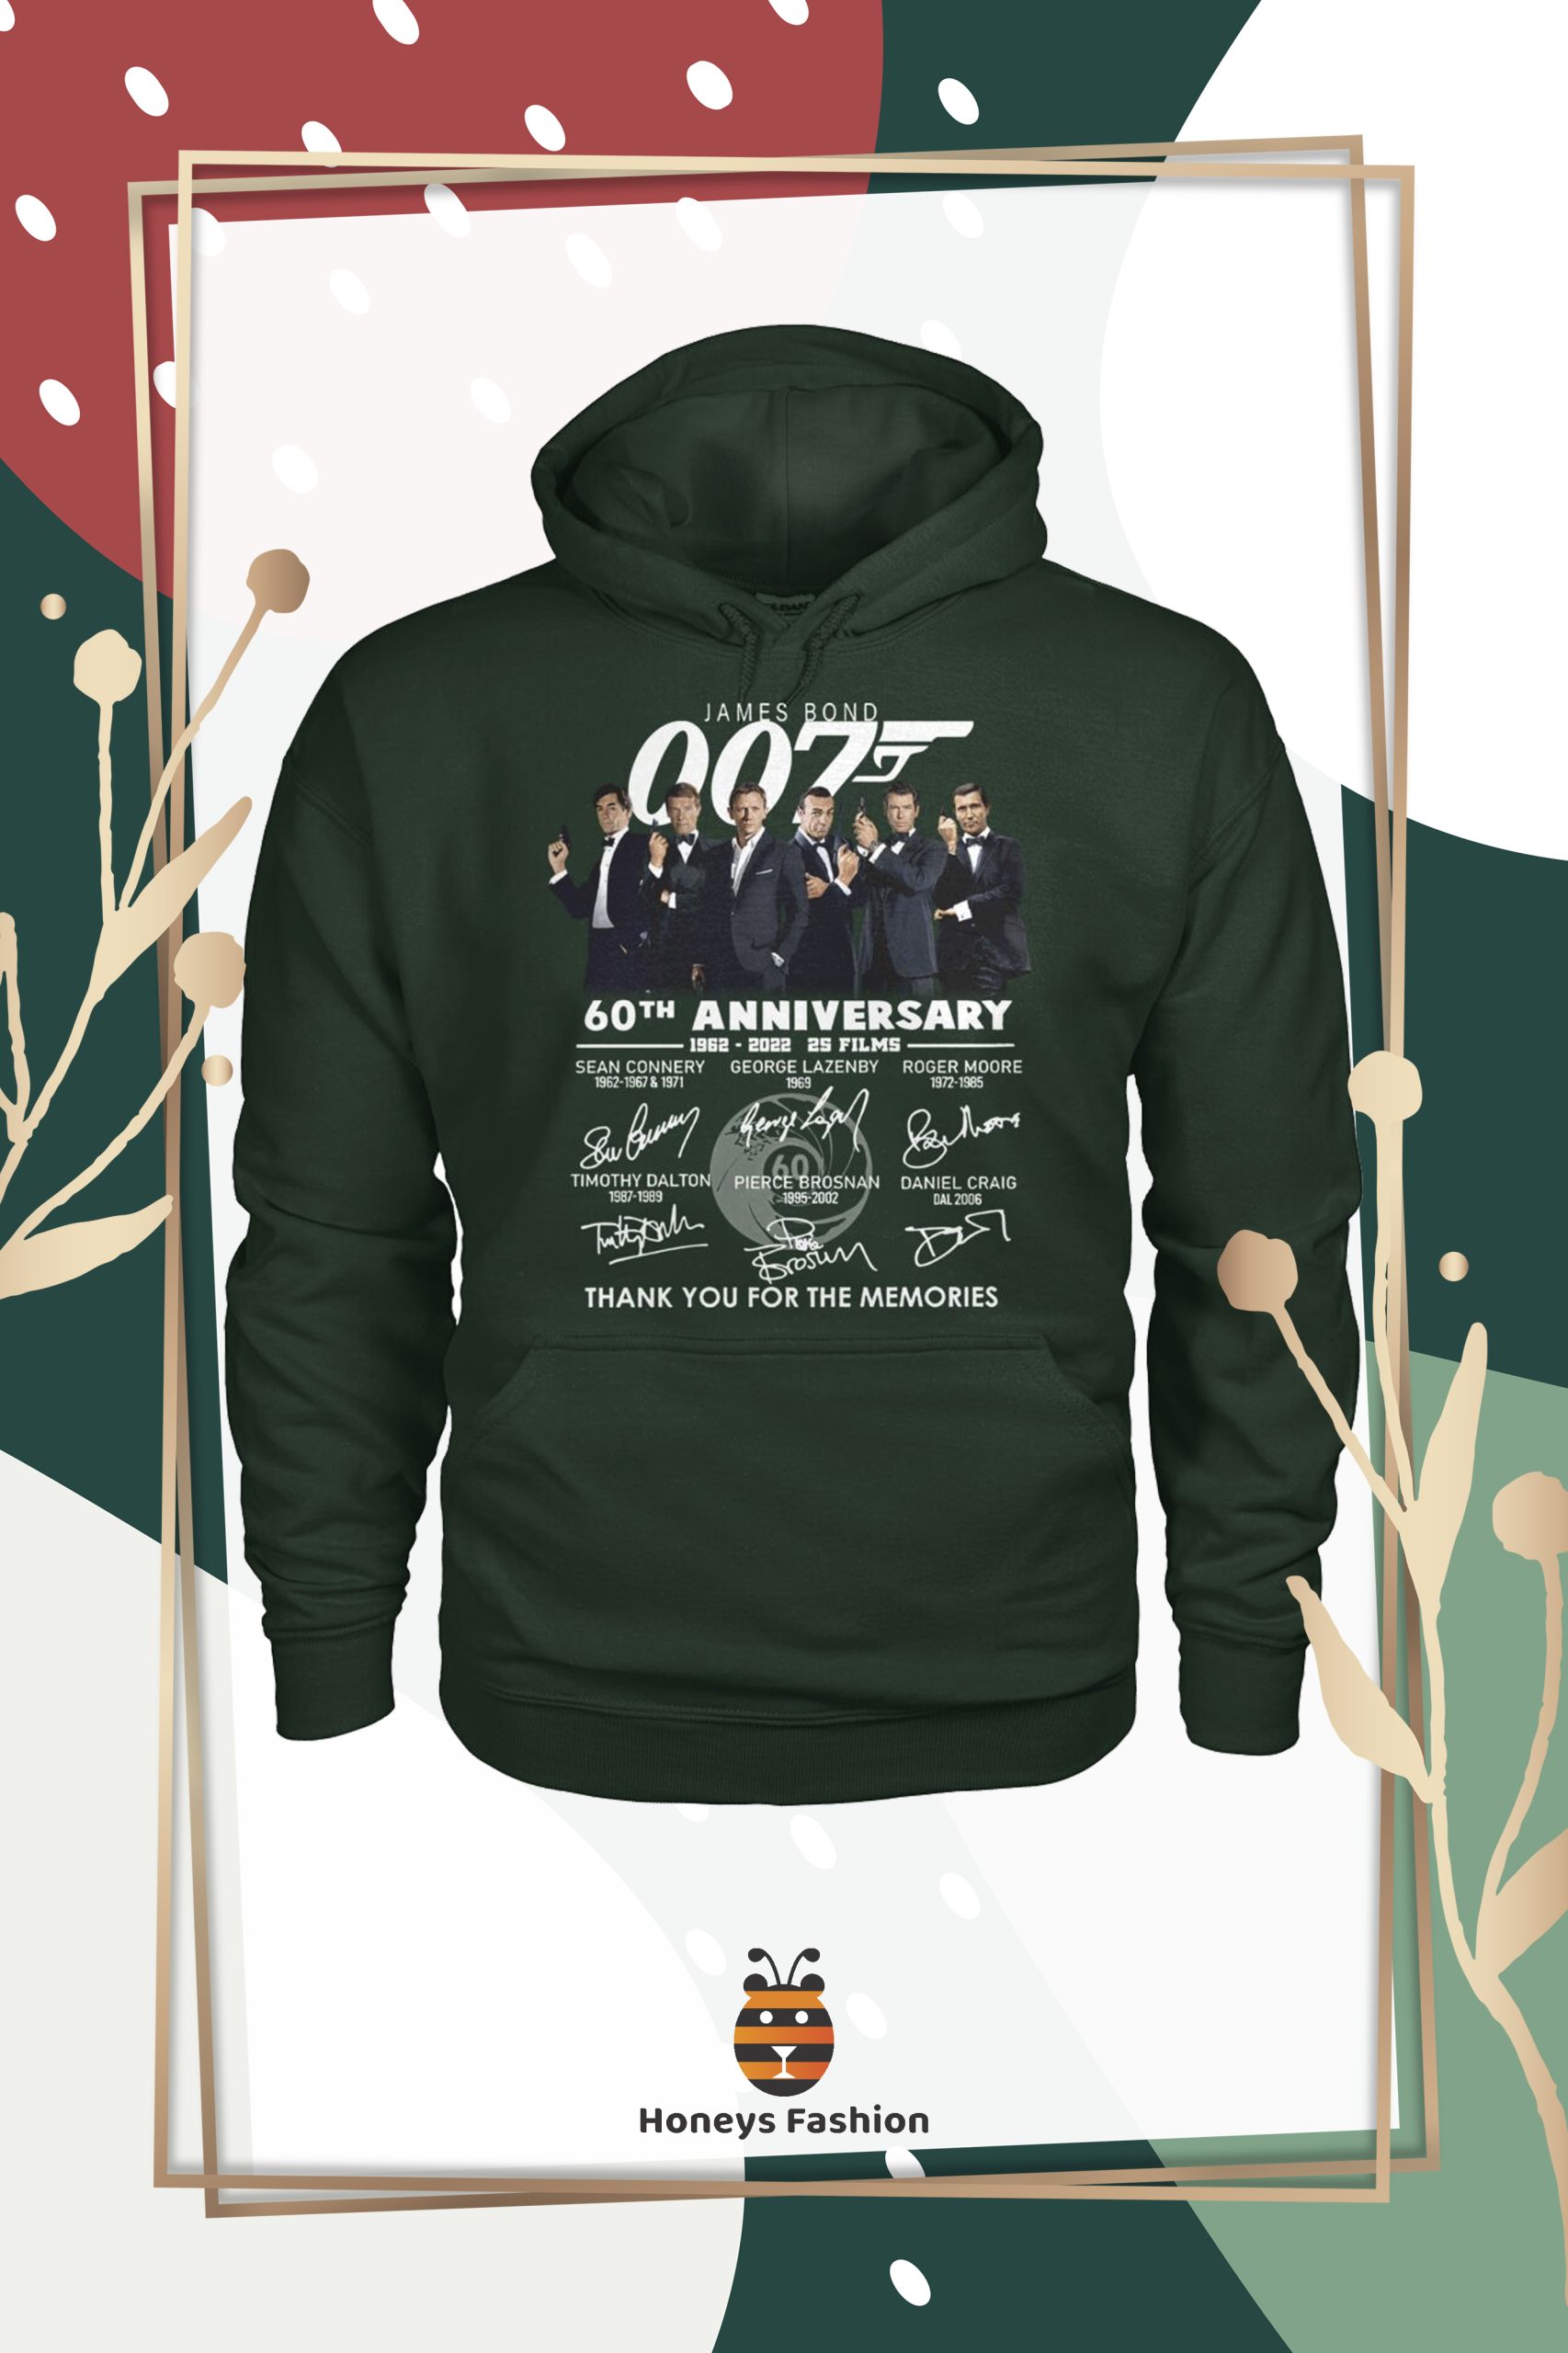 James Bond 007 60th Anniversary Thank You For The Memories Shirt Hoodie